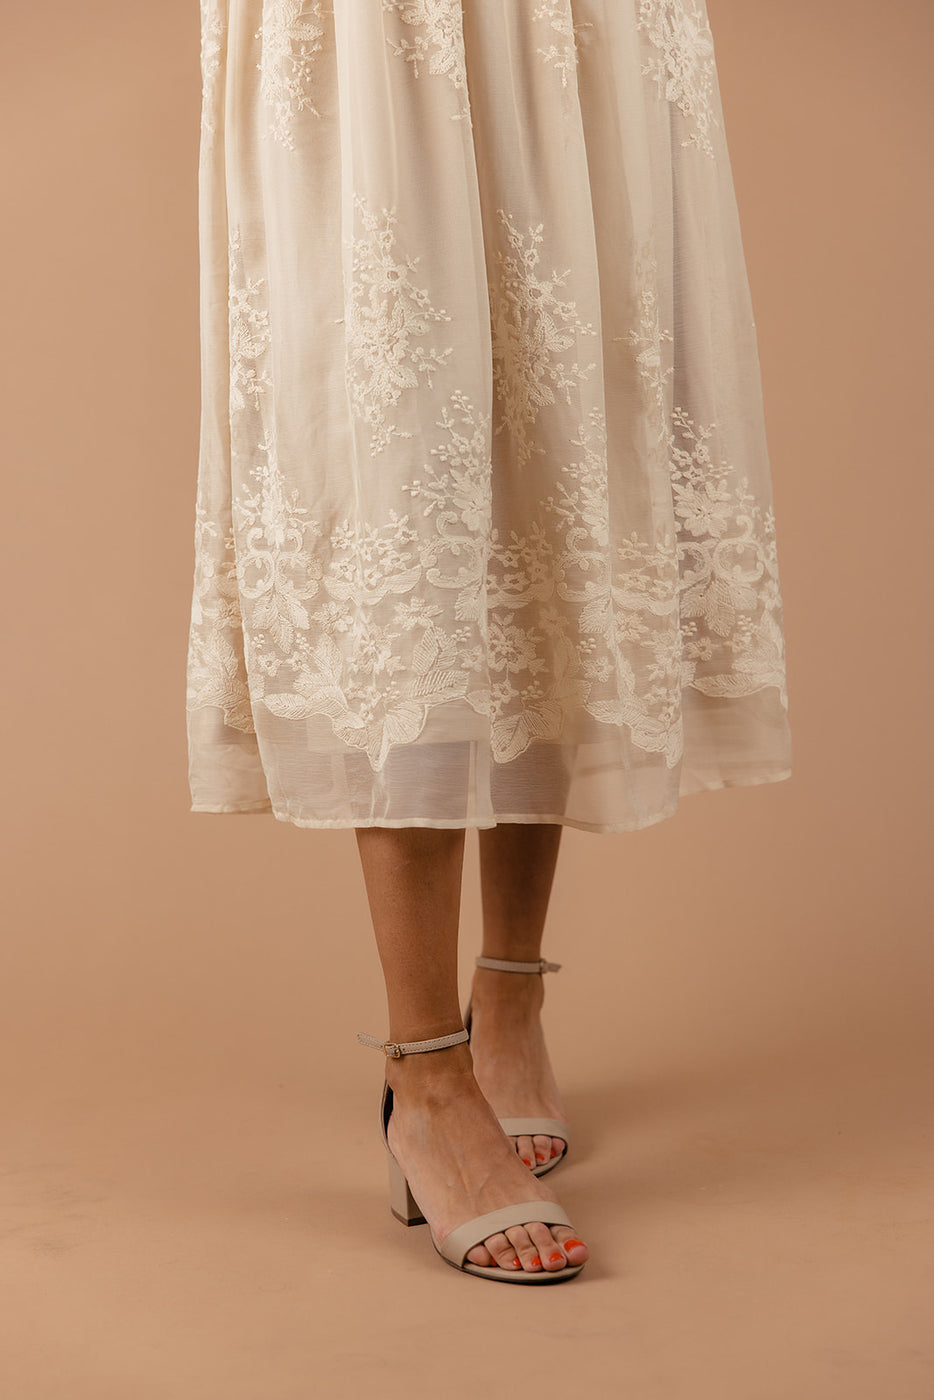 a woman wearing a white dress and sandals